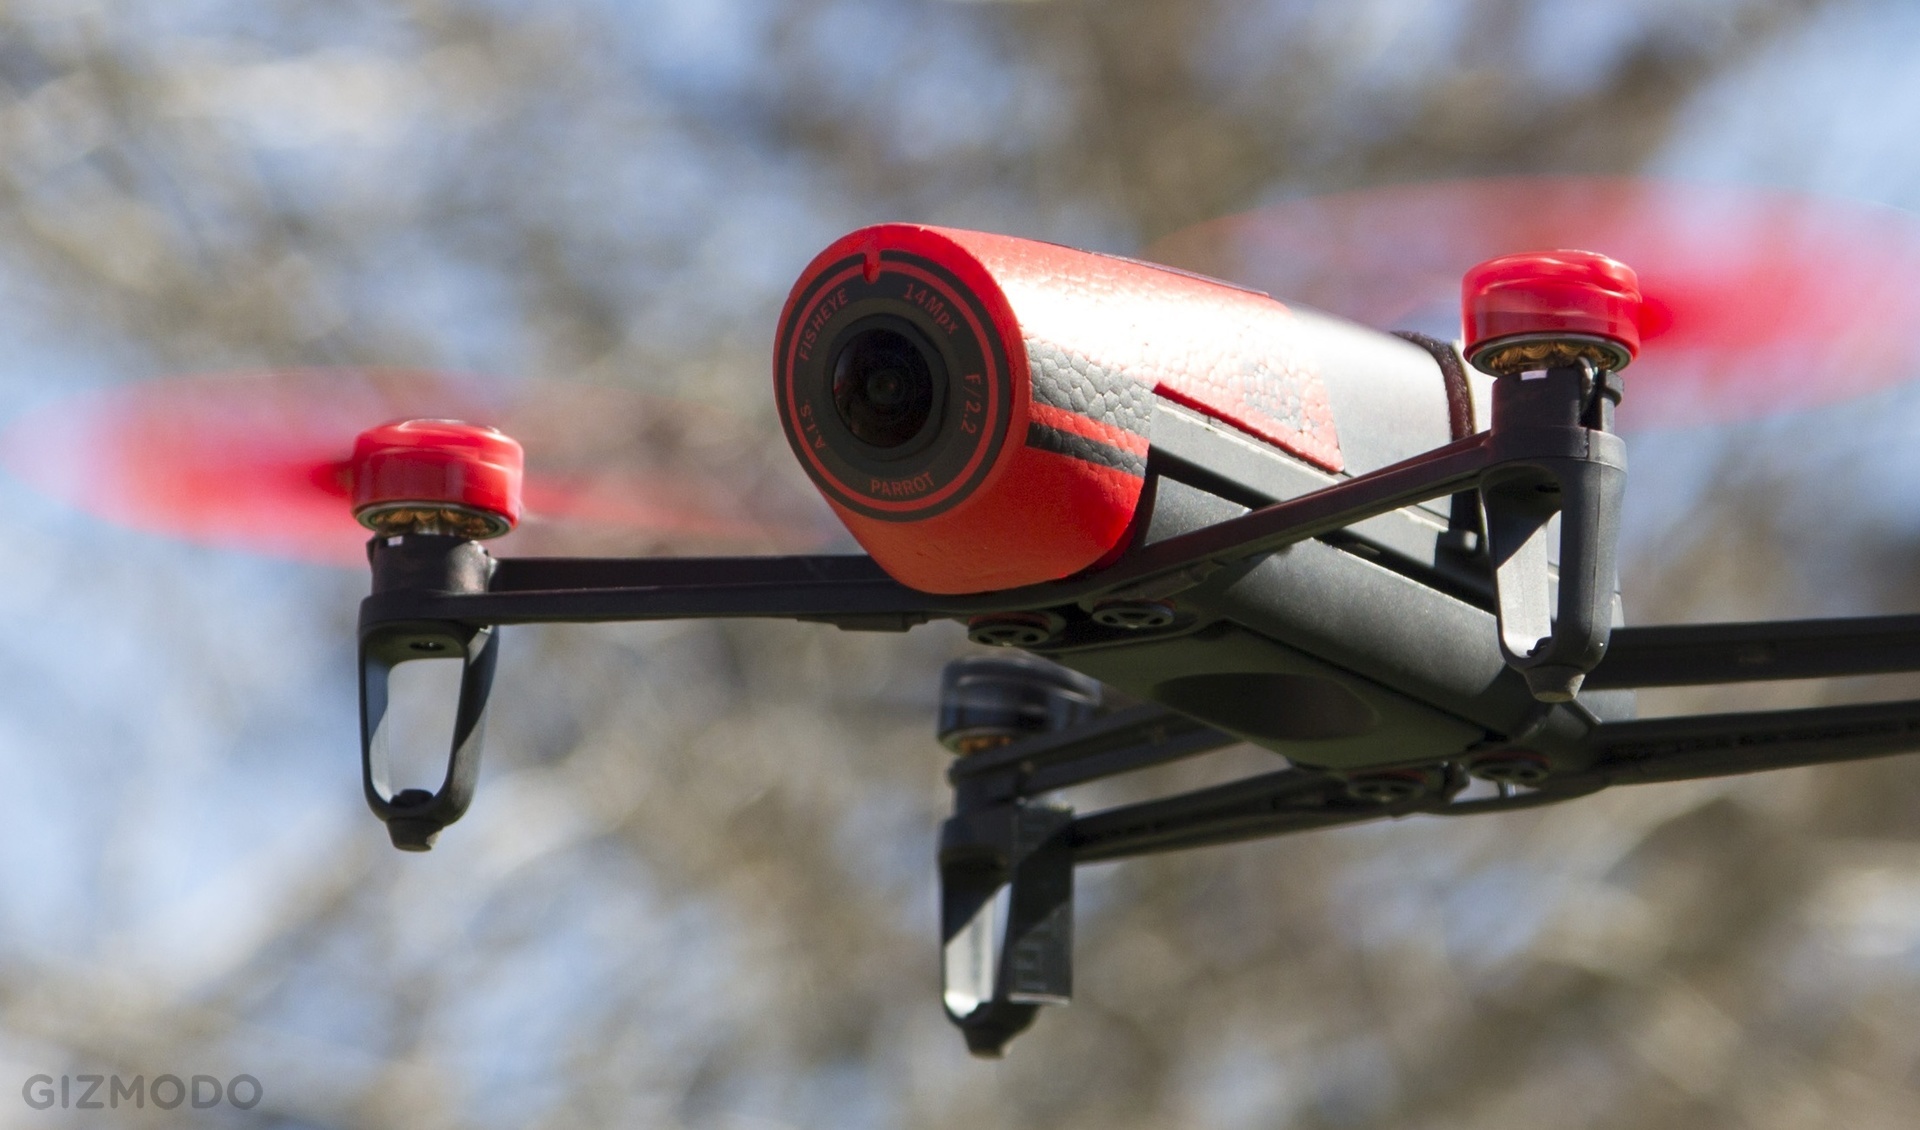 Parrot Bebop Drone Review: Looks Aren’t Everything